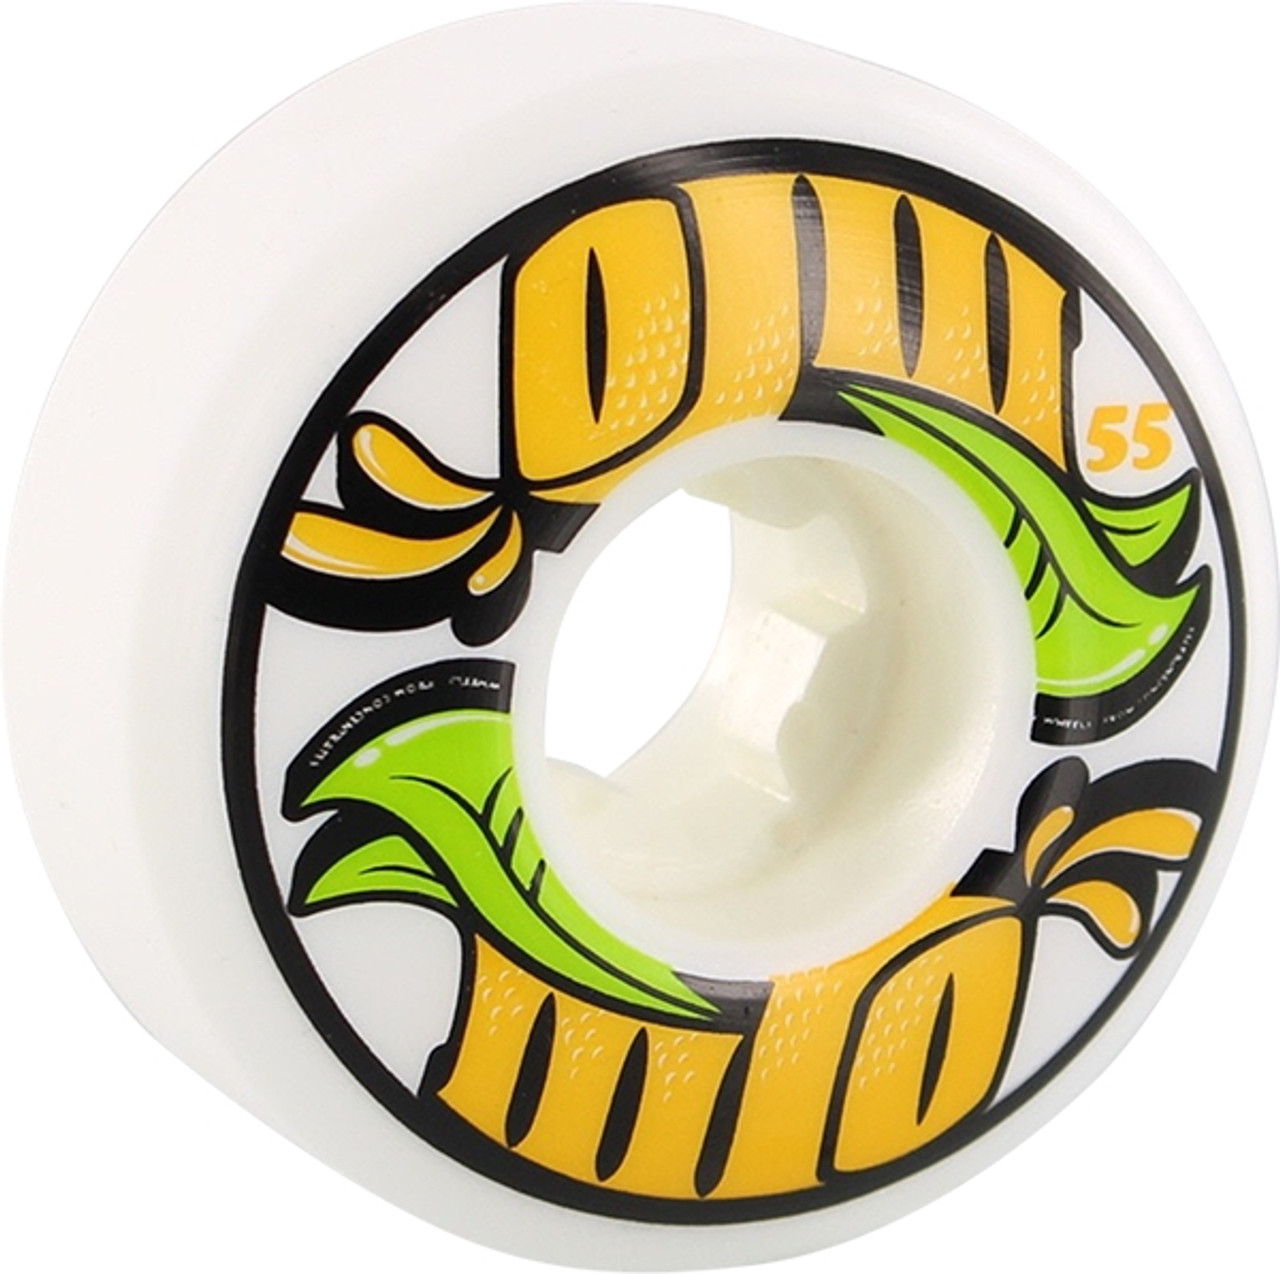 OJ FROM CONCENTRATE EZ EDGE 55mm 101a WHITE WHEELS SET